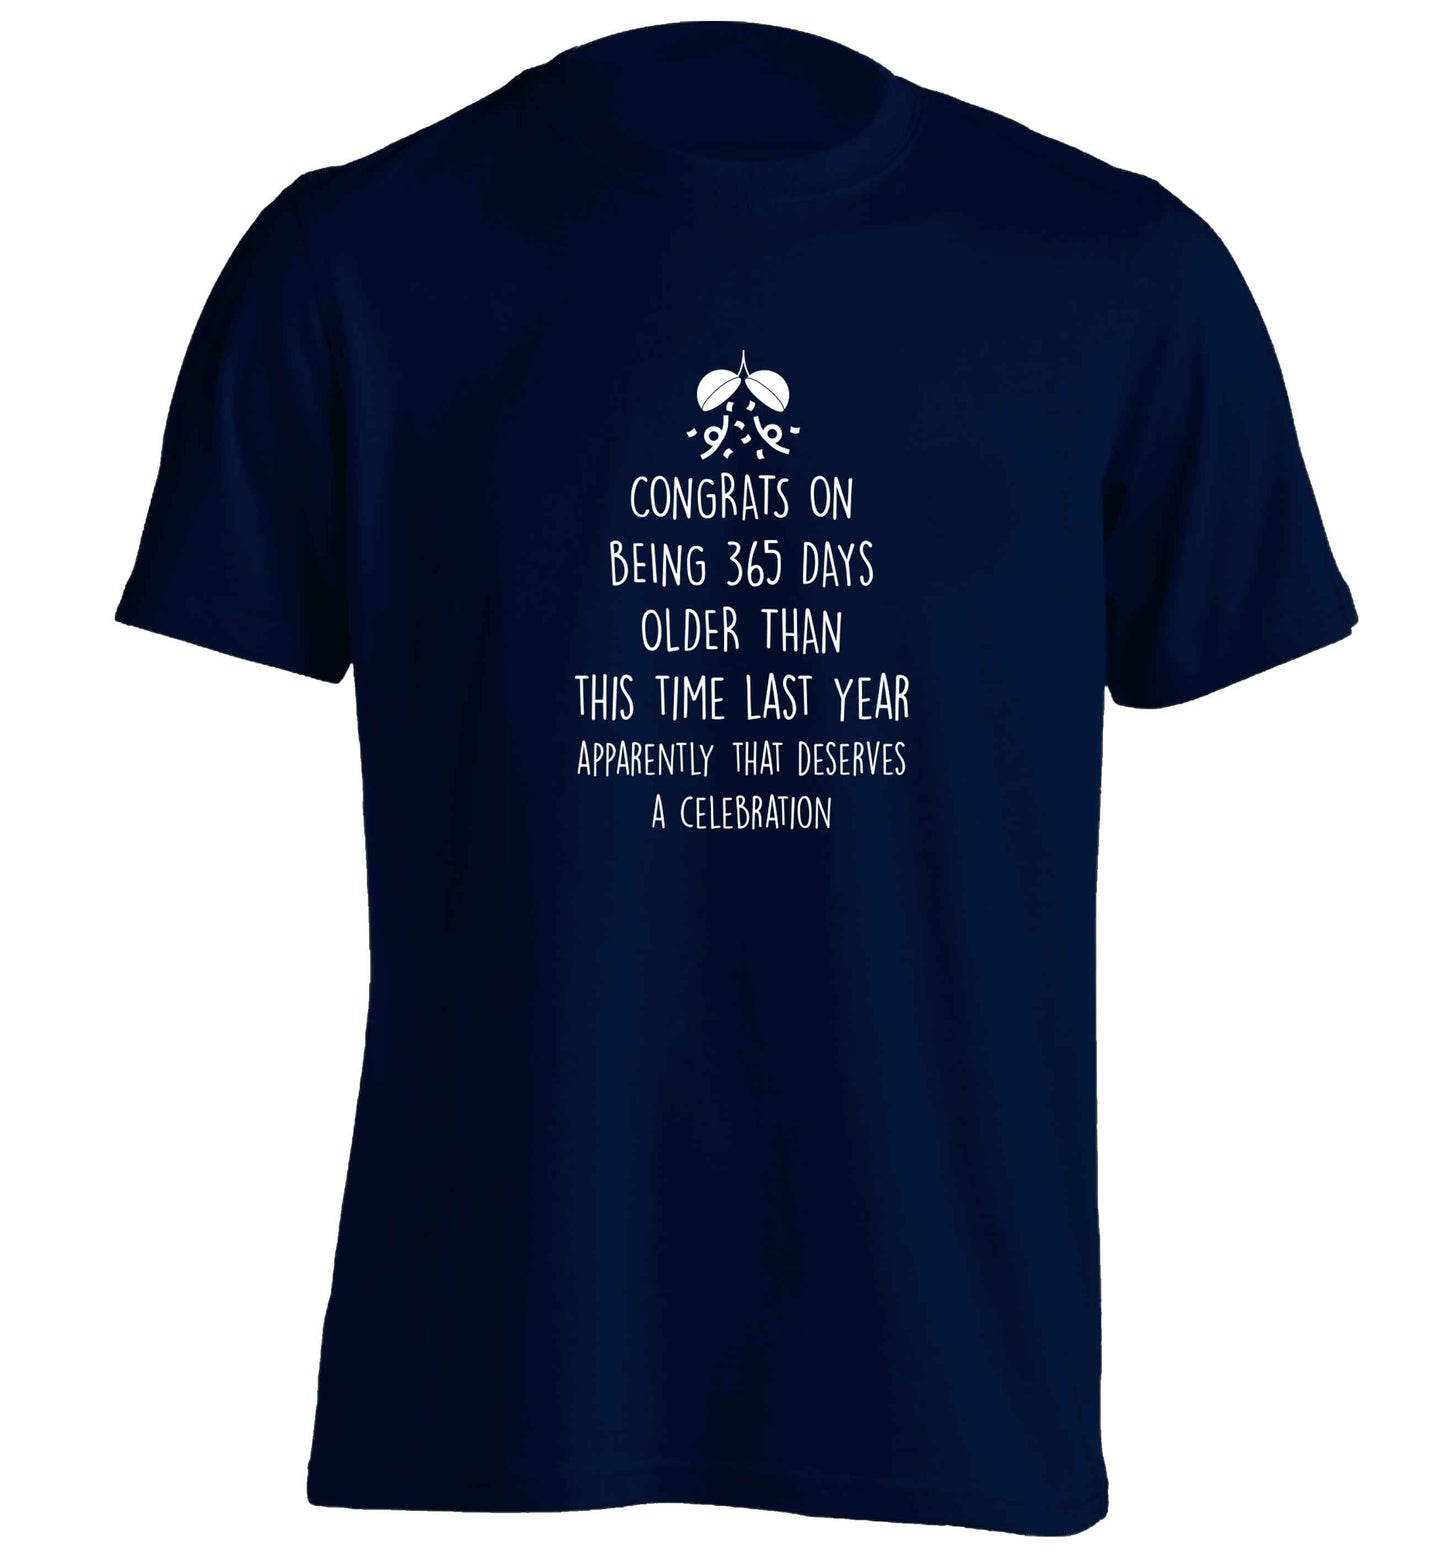 Congrats on being 365 days older than you were this time last year apparently that deserves a celebration adults unisex navy Tshirt 2XL